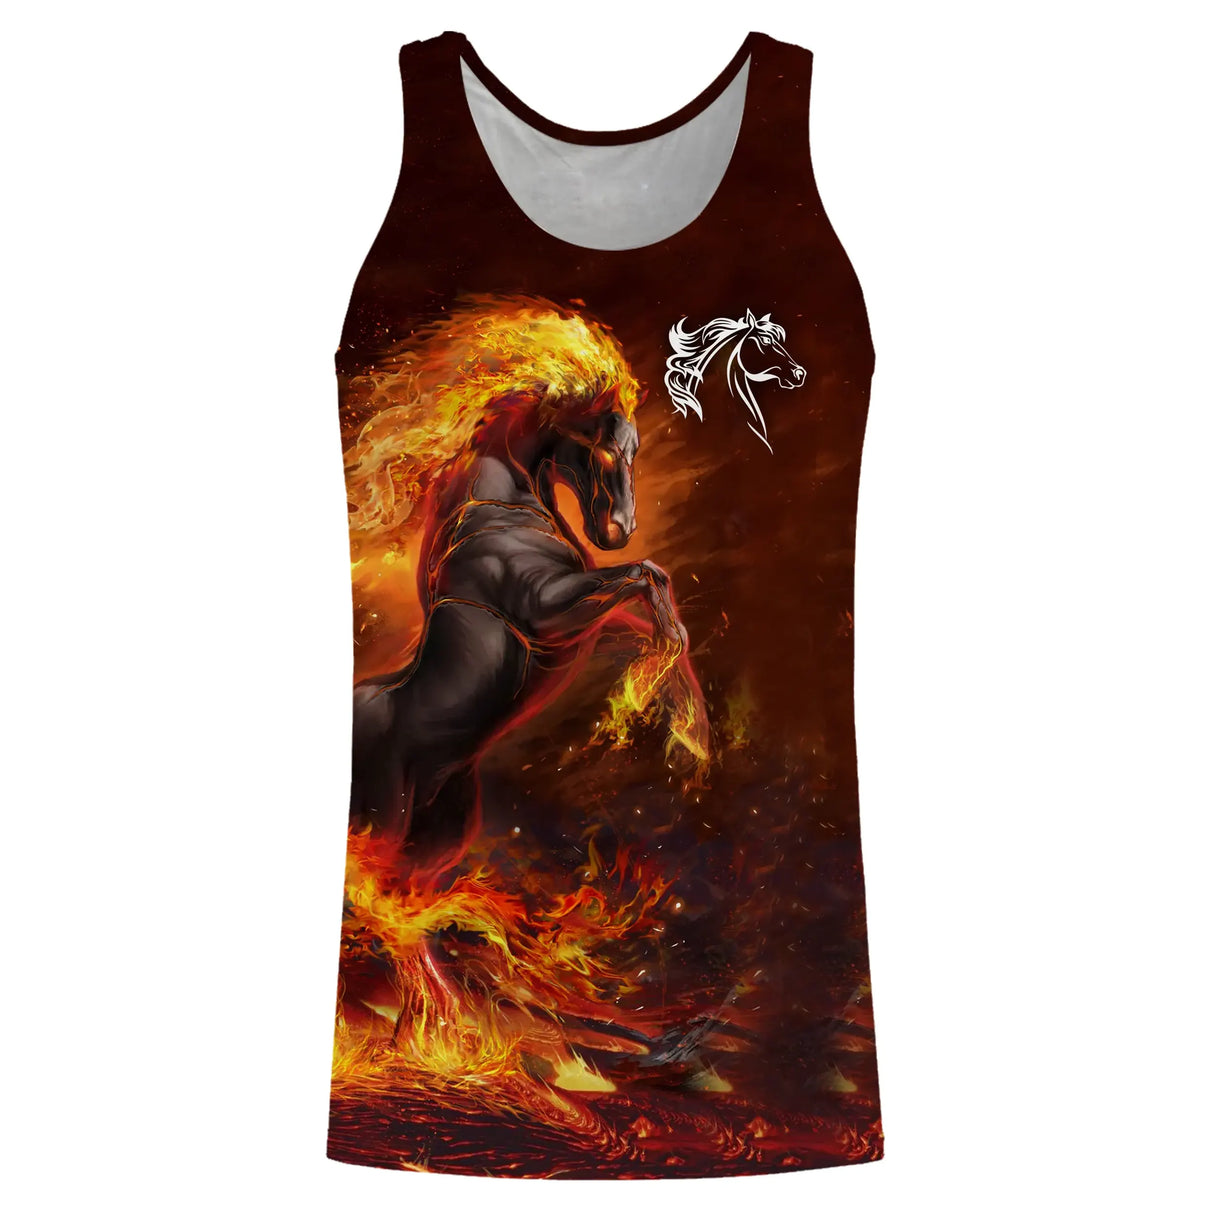 Chiptshirts Fire Horses T-Shirt - Personalized Gift for Horse Lover, Horse Fan - CTS18062215